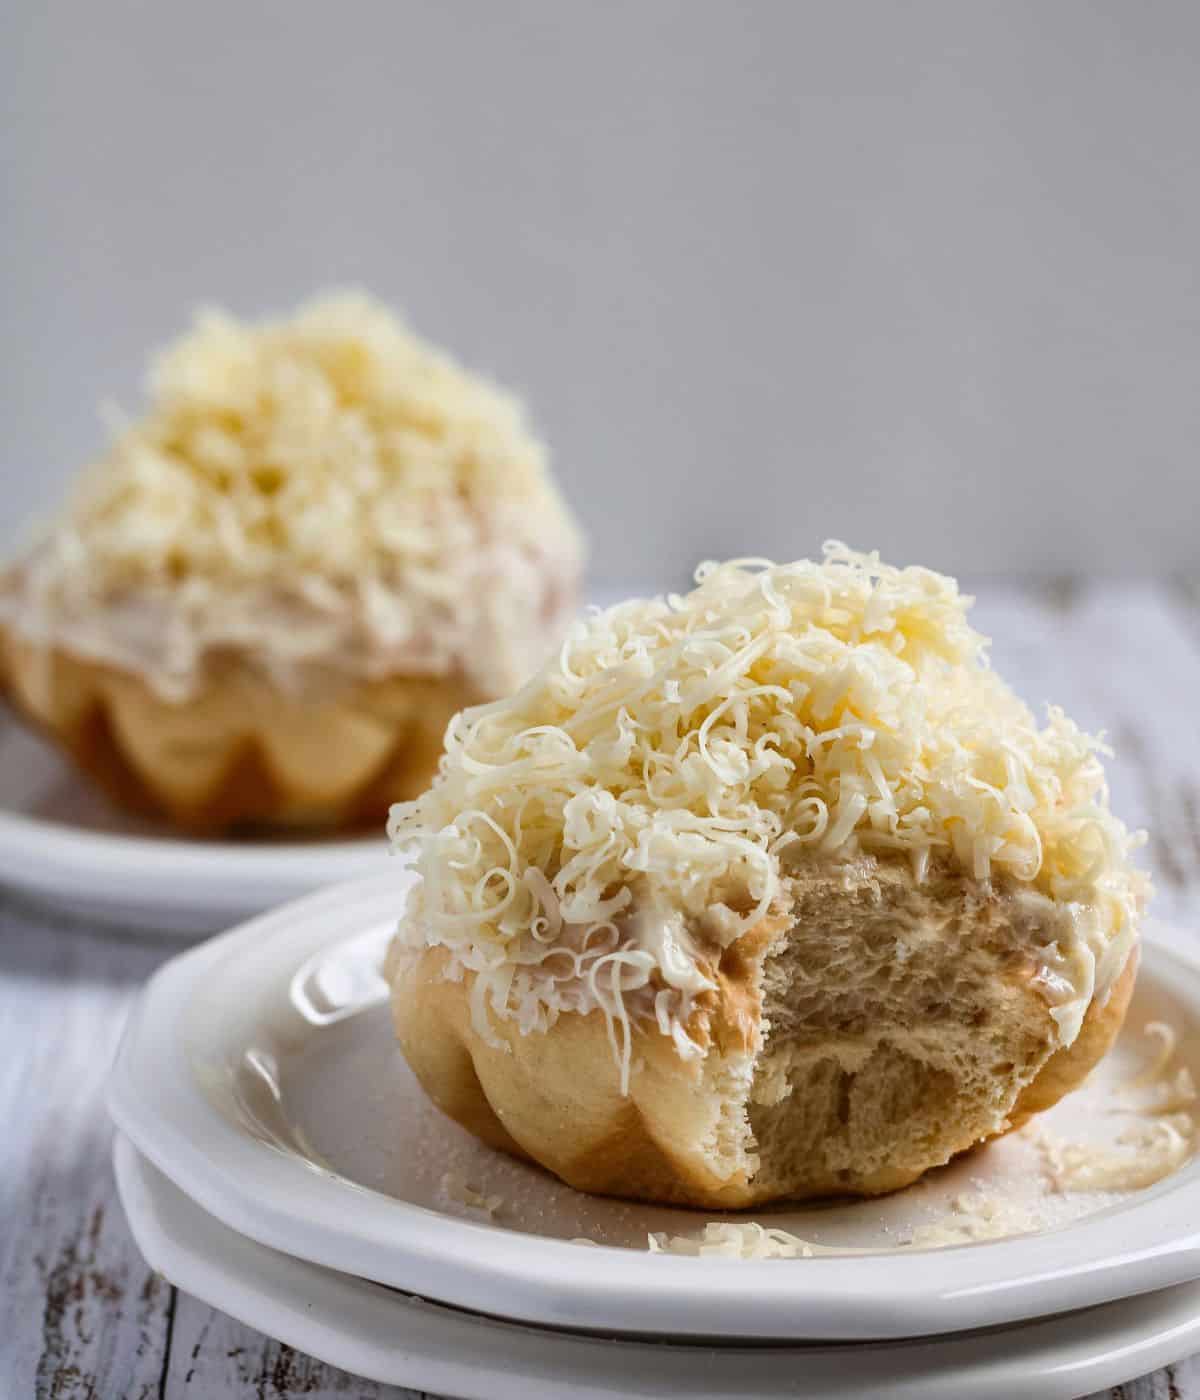 Ensaymada in a plate with a bite.